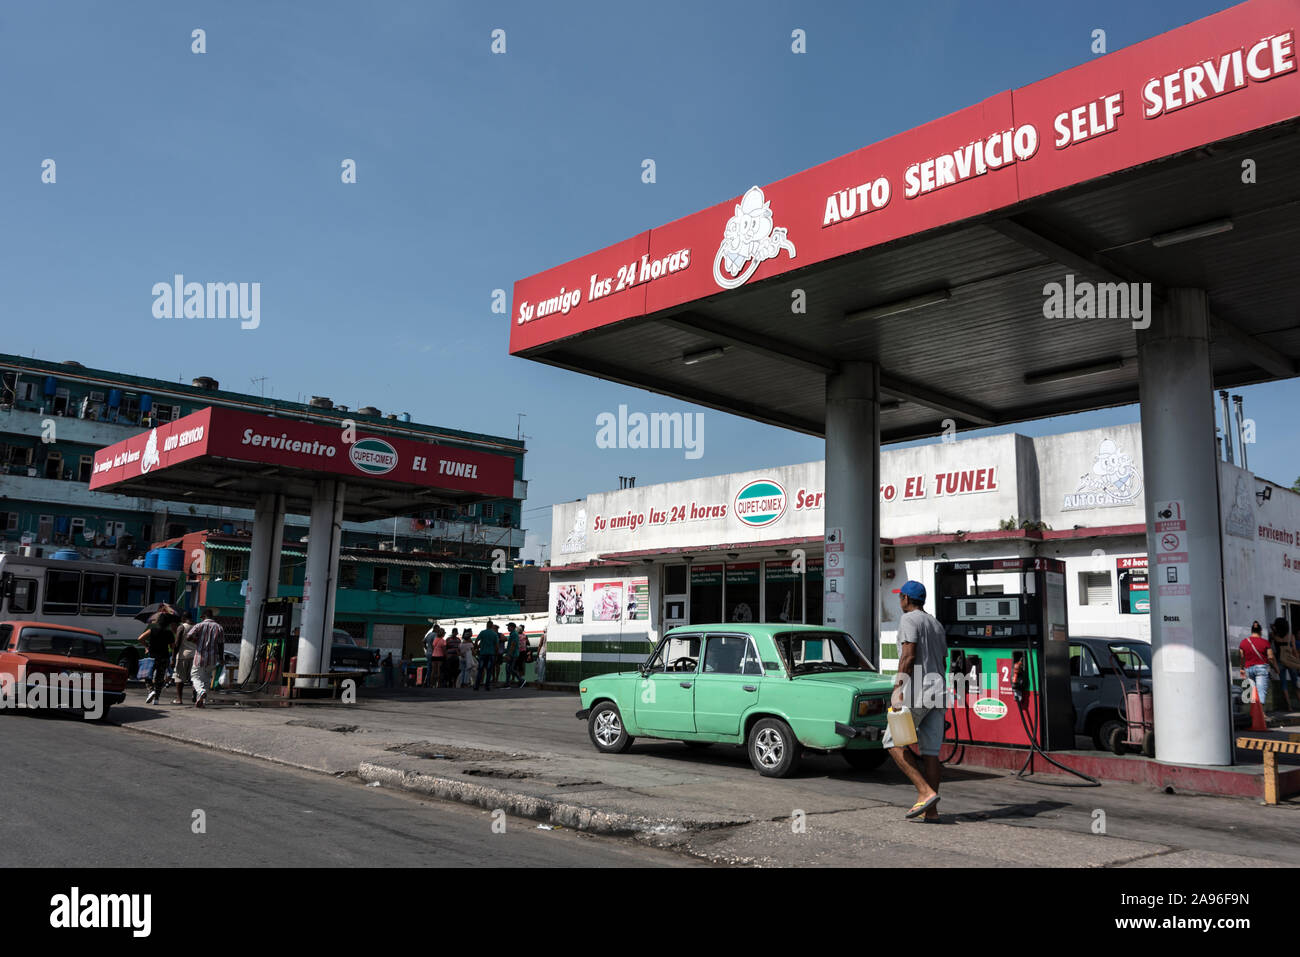 One of the petrol station outlets in Havana, Cuba. CUPET is Cuba's largest oil company and is owned and operated by the Cuban national government. Stock Photo